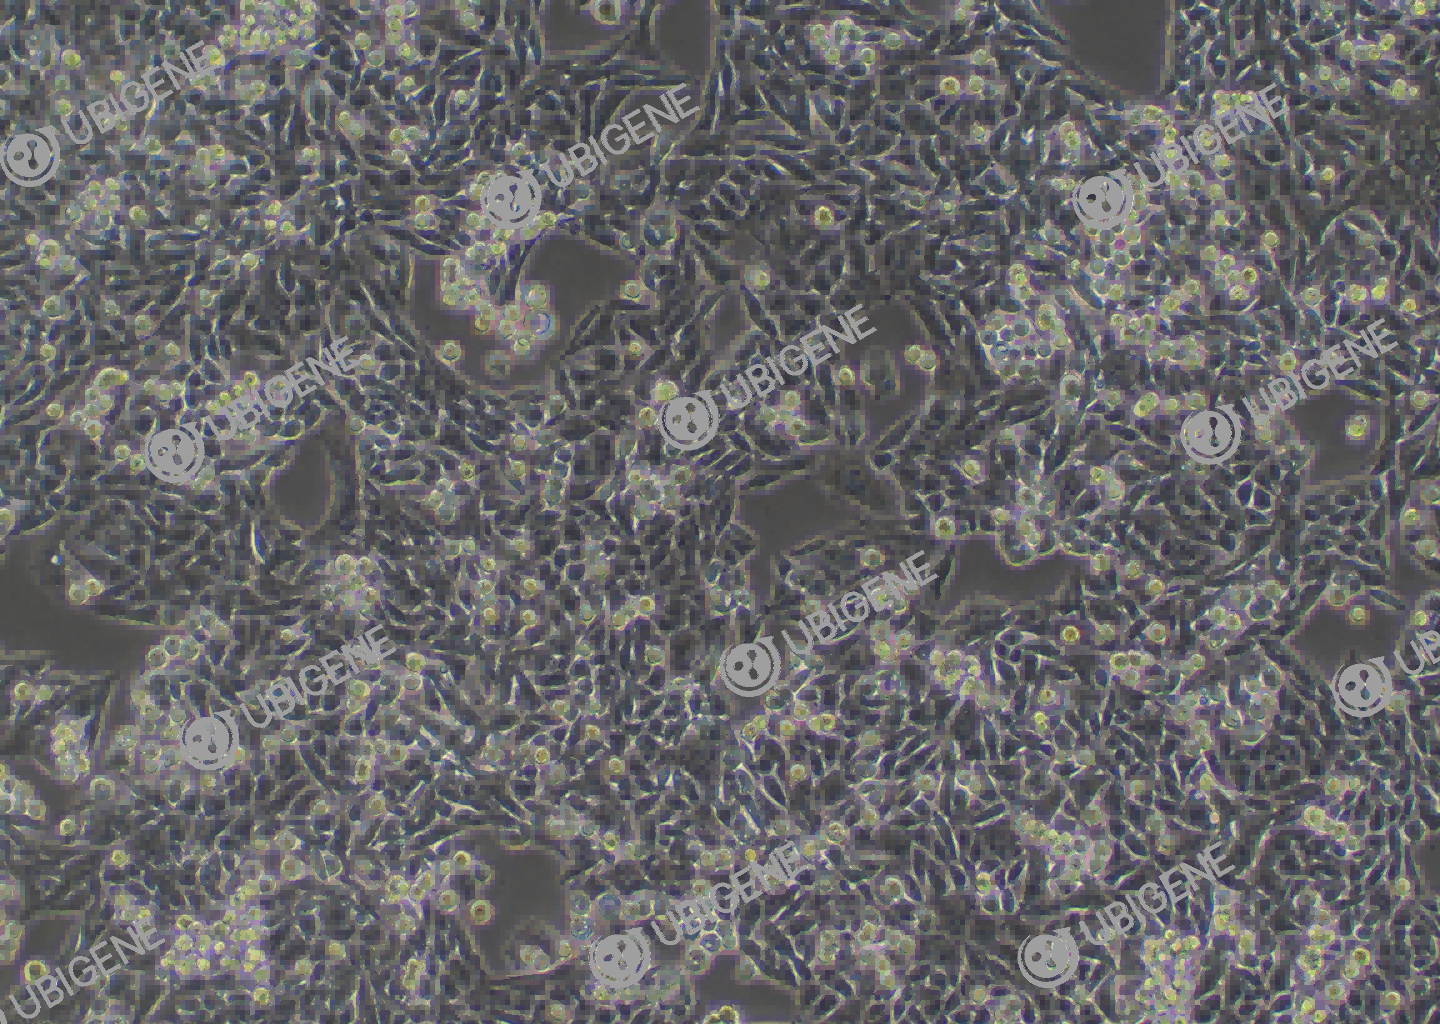 MB-49 cell line Cultured cell morphology